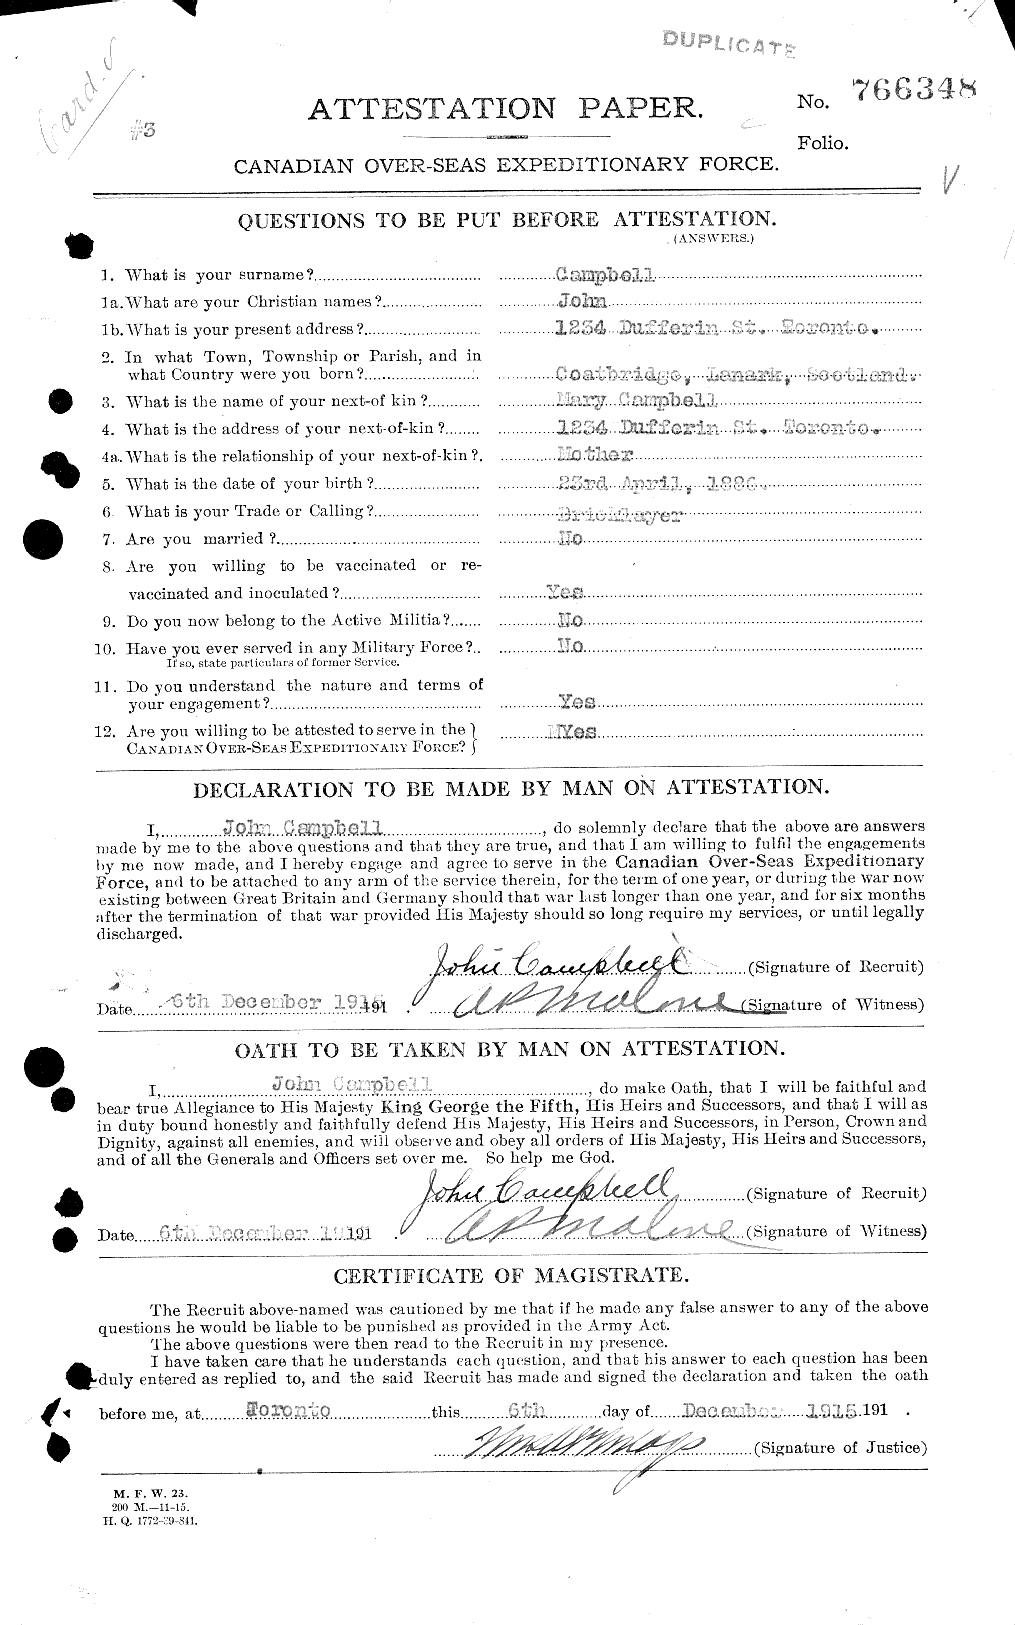 Personnel Records of the First World War - CEF 008456a